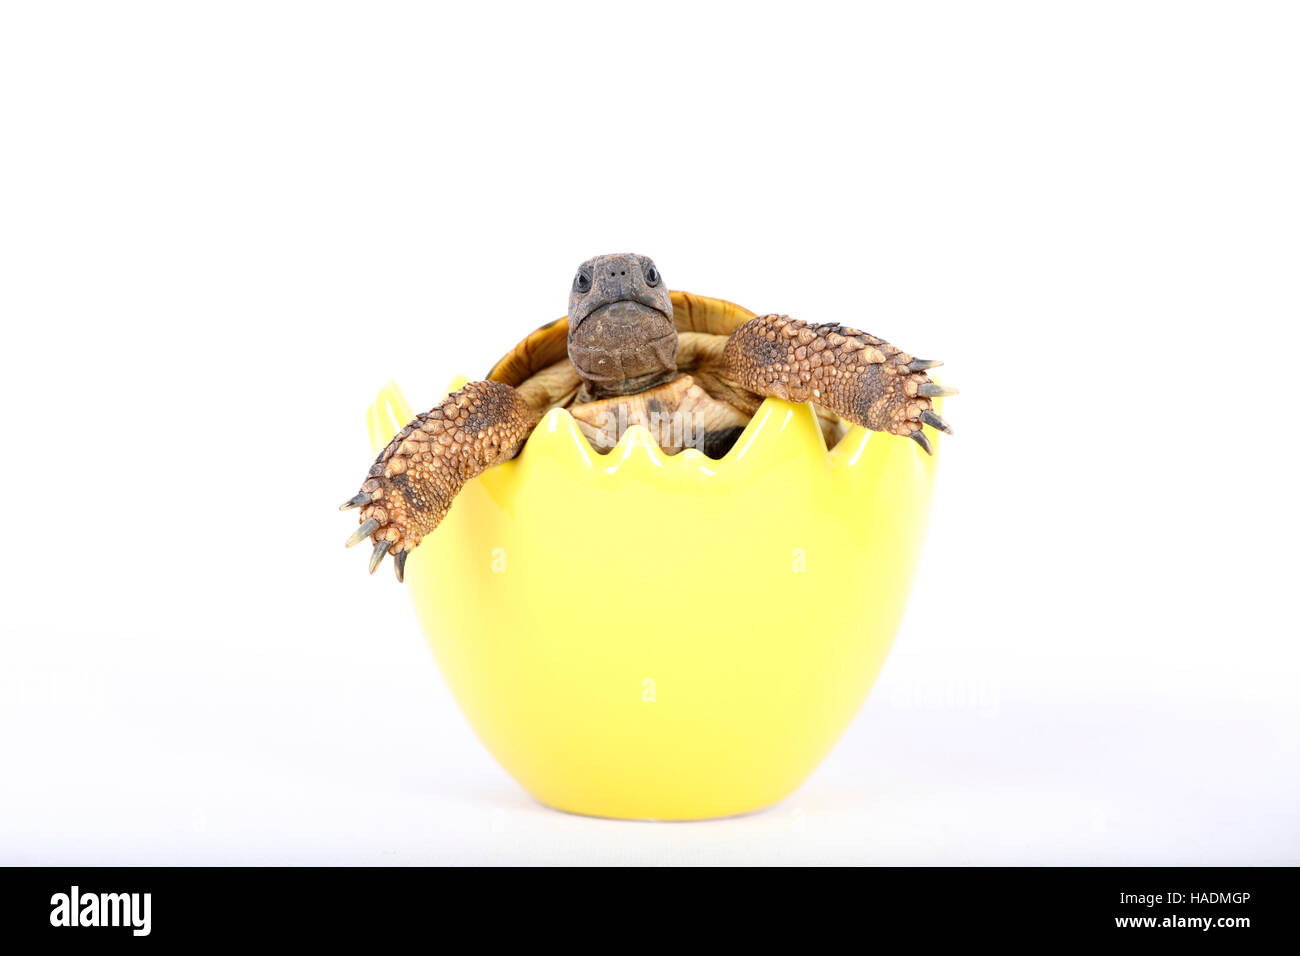 Hermanns Tortoise (Testudo hermanni) in a decorative pot, shaped like an eggshell. Studio picture against a white background. Germany Stock Photo